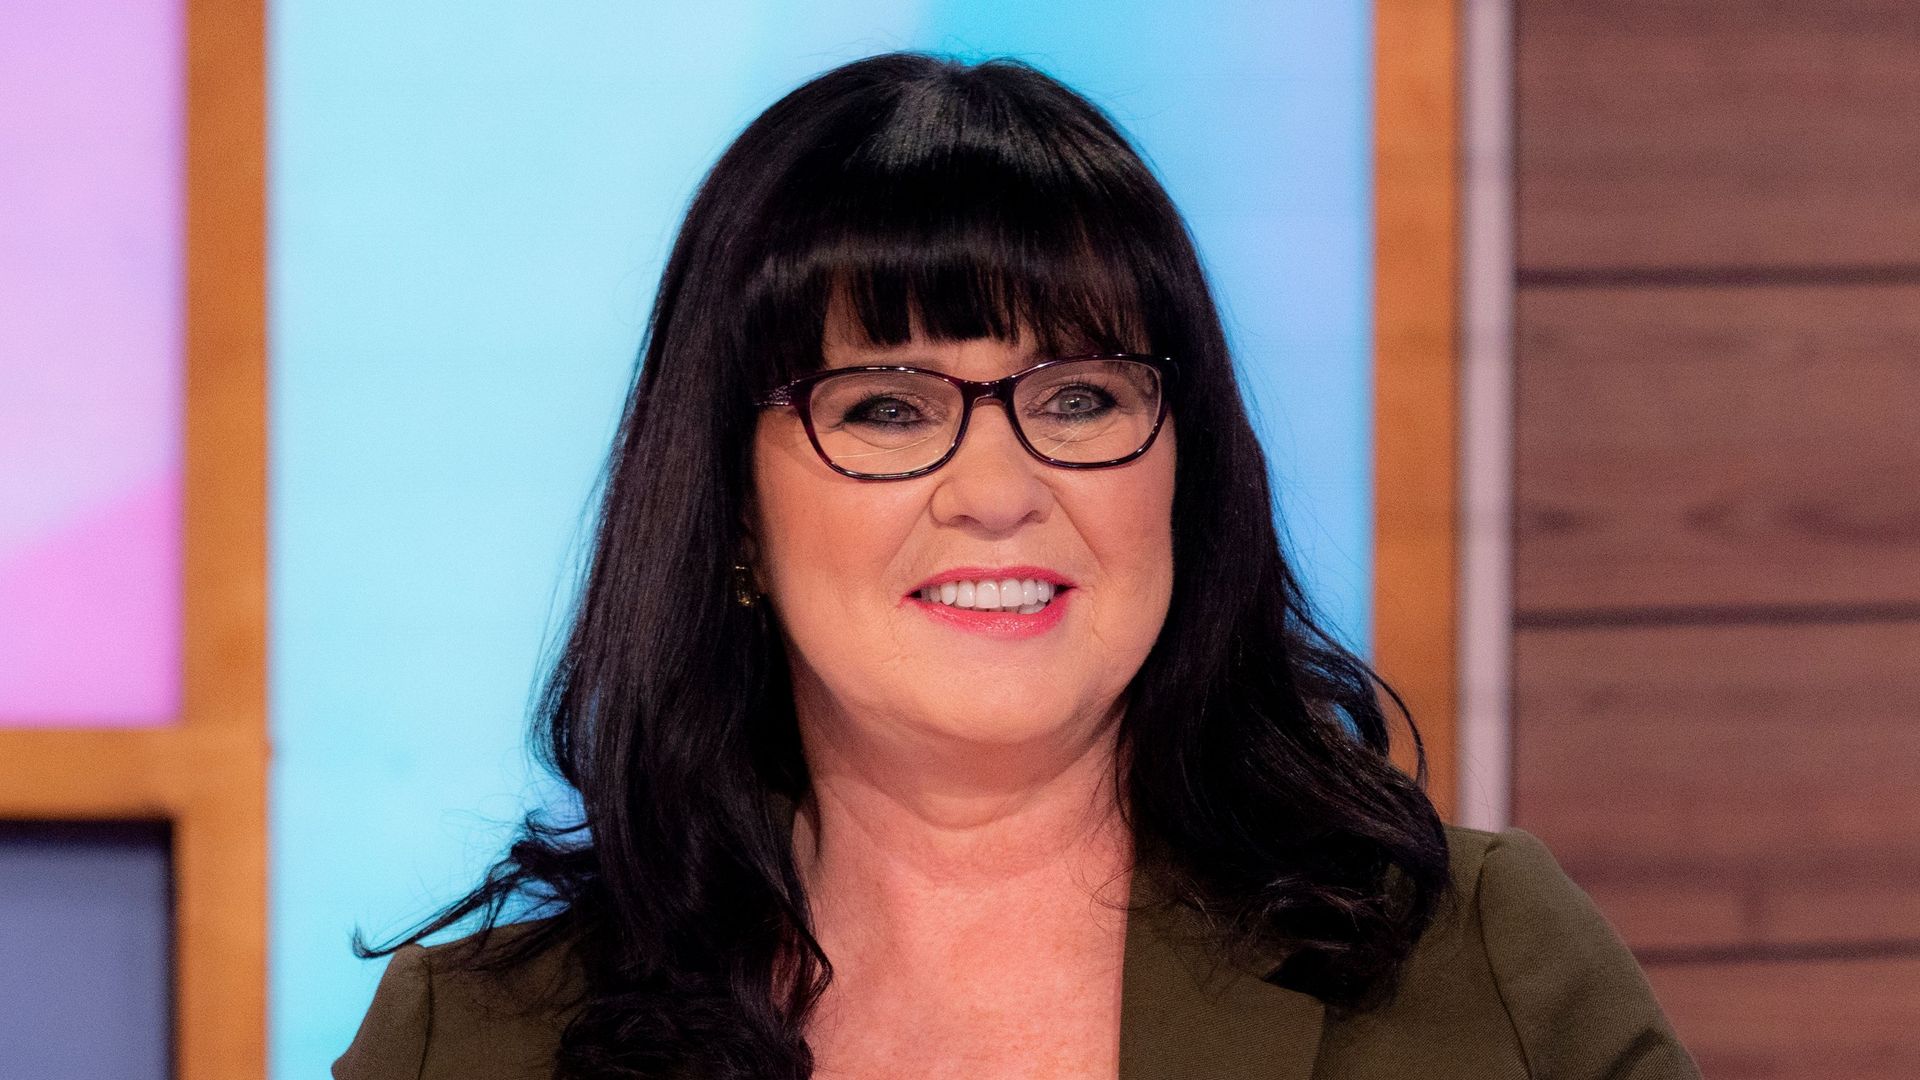 Loose Women S Coleen Nolan Gets Fans Talking In Daring Waist Cinched Outfit Hello